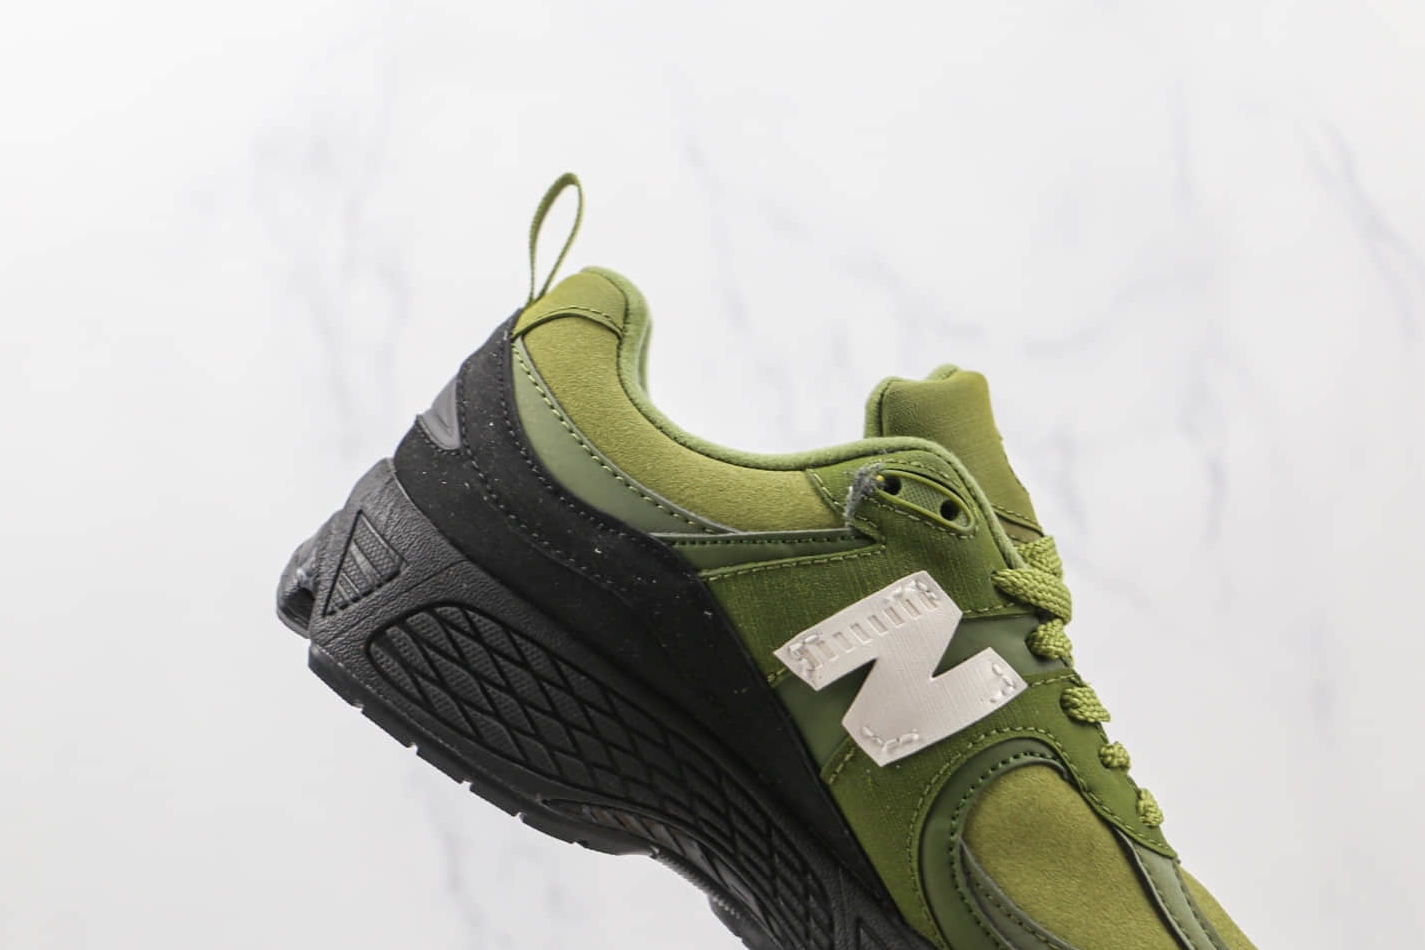 New Balance The Basement x 2002R 'Moss Green' M2002RBB - Exclusive Collaboration for Sneaker Enthusiasts